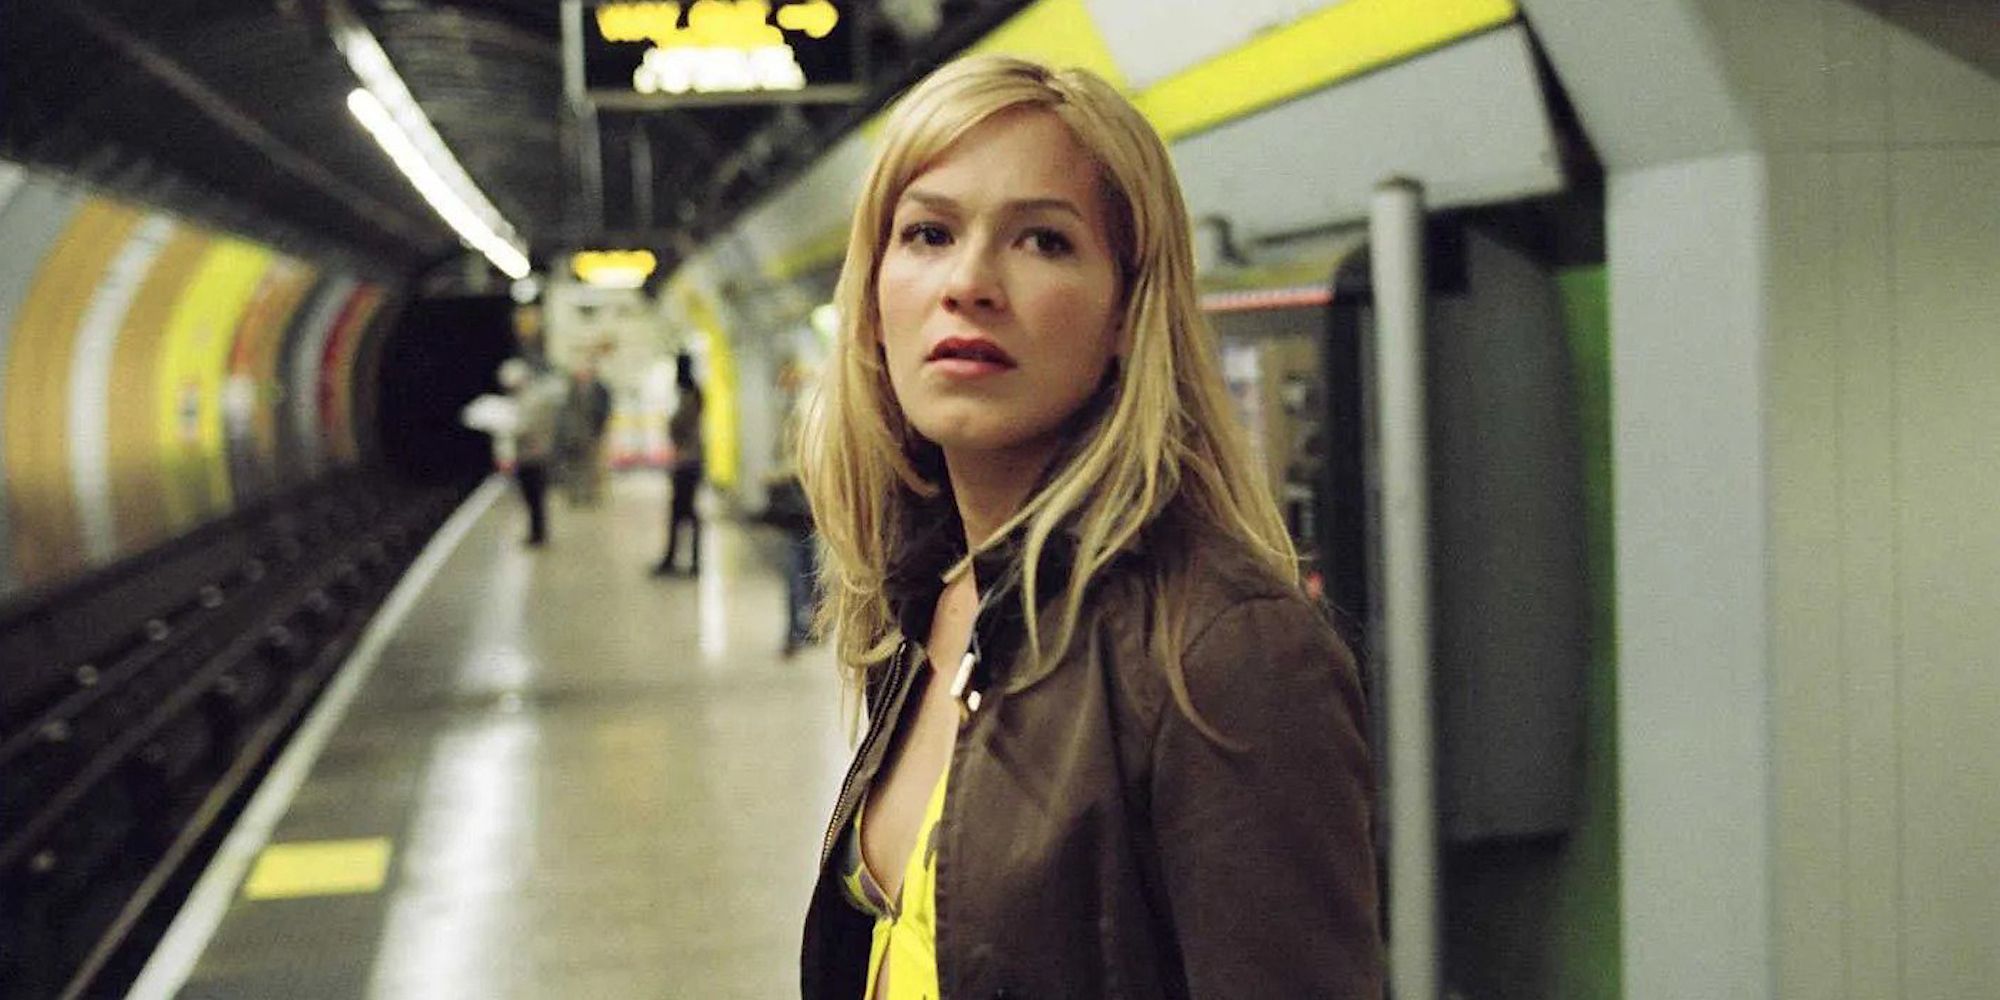 Franka Potente as Kate standing in a subway station in the film Creep.